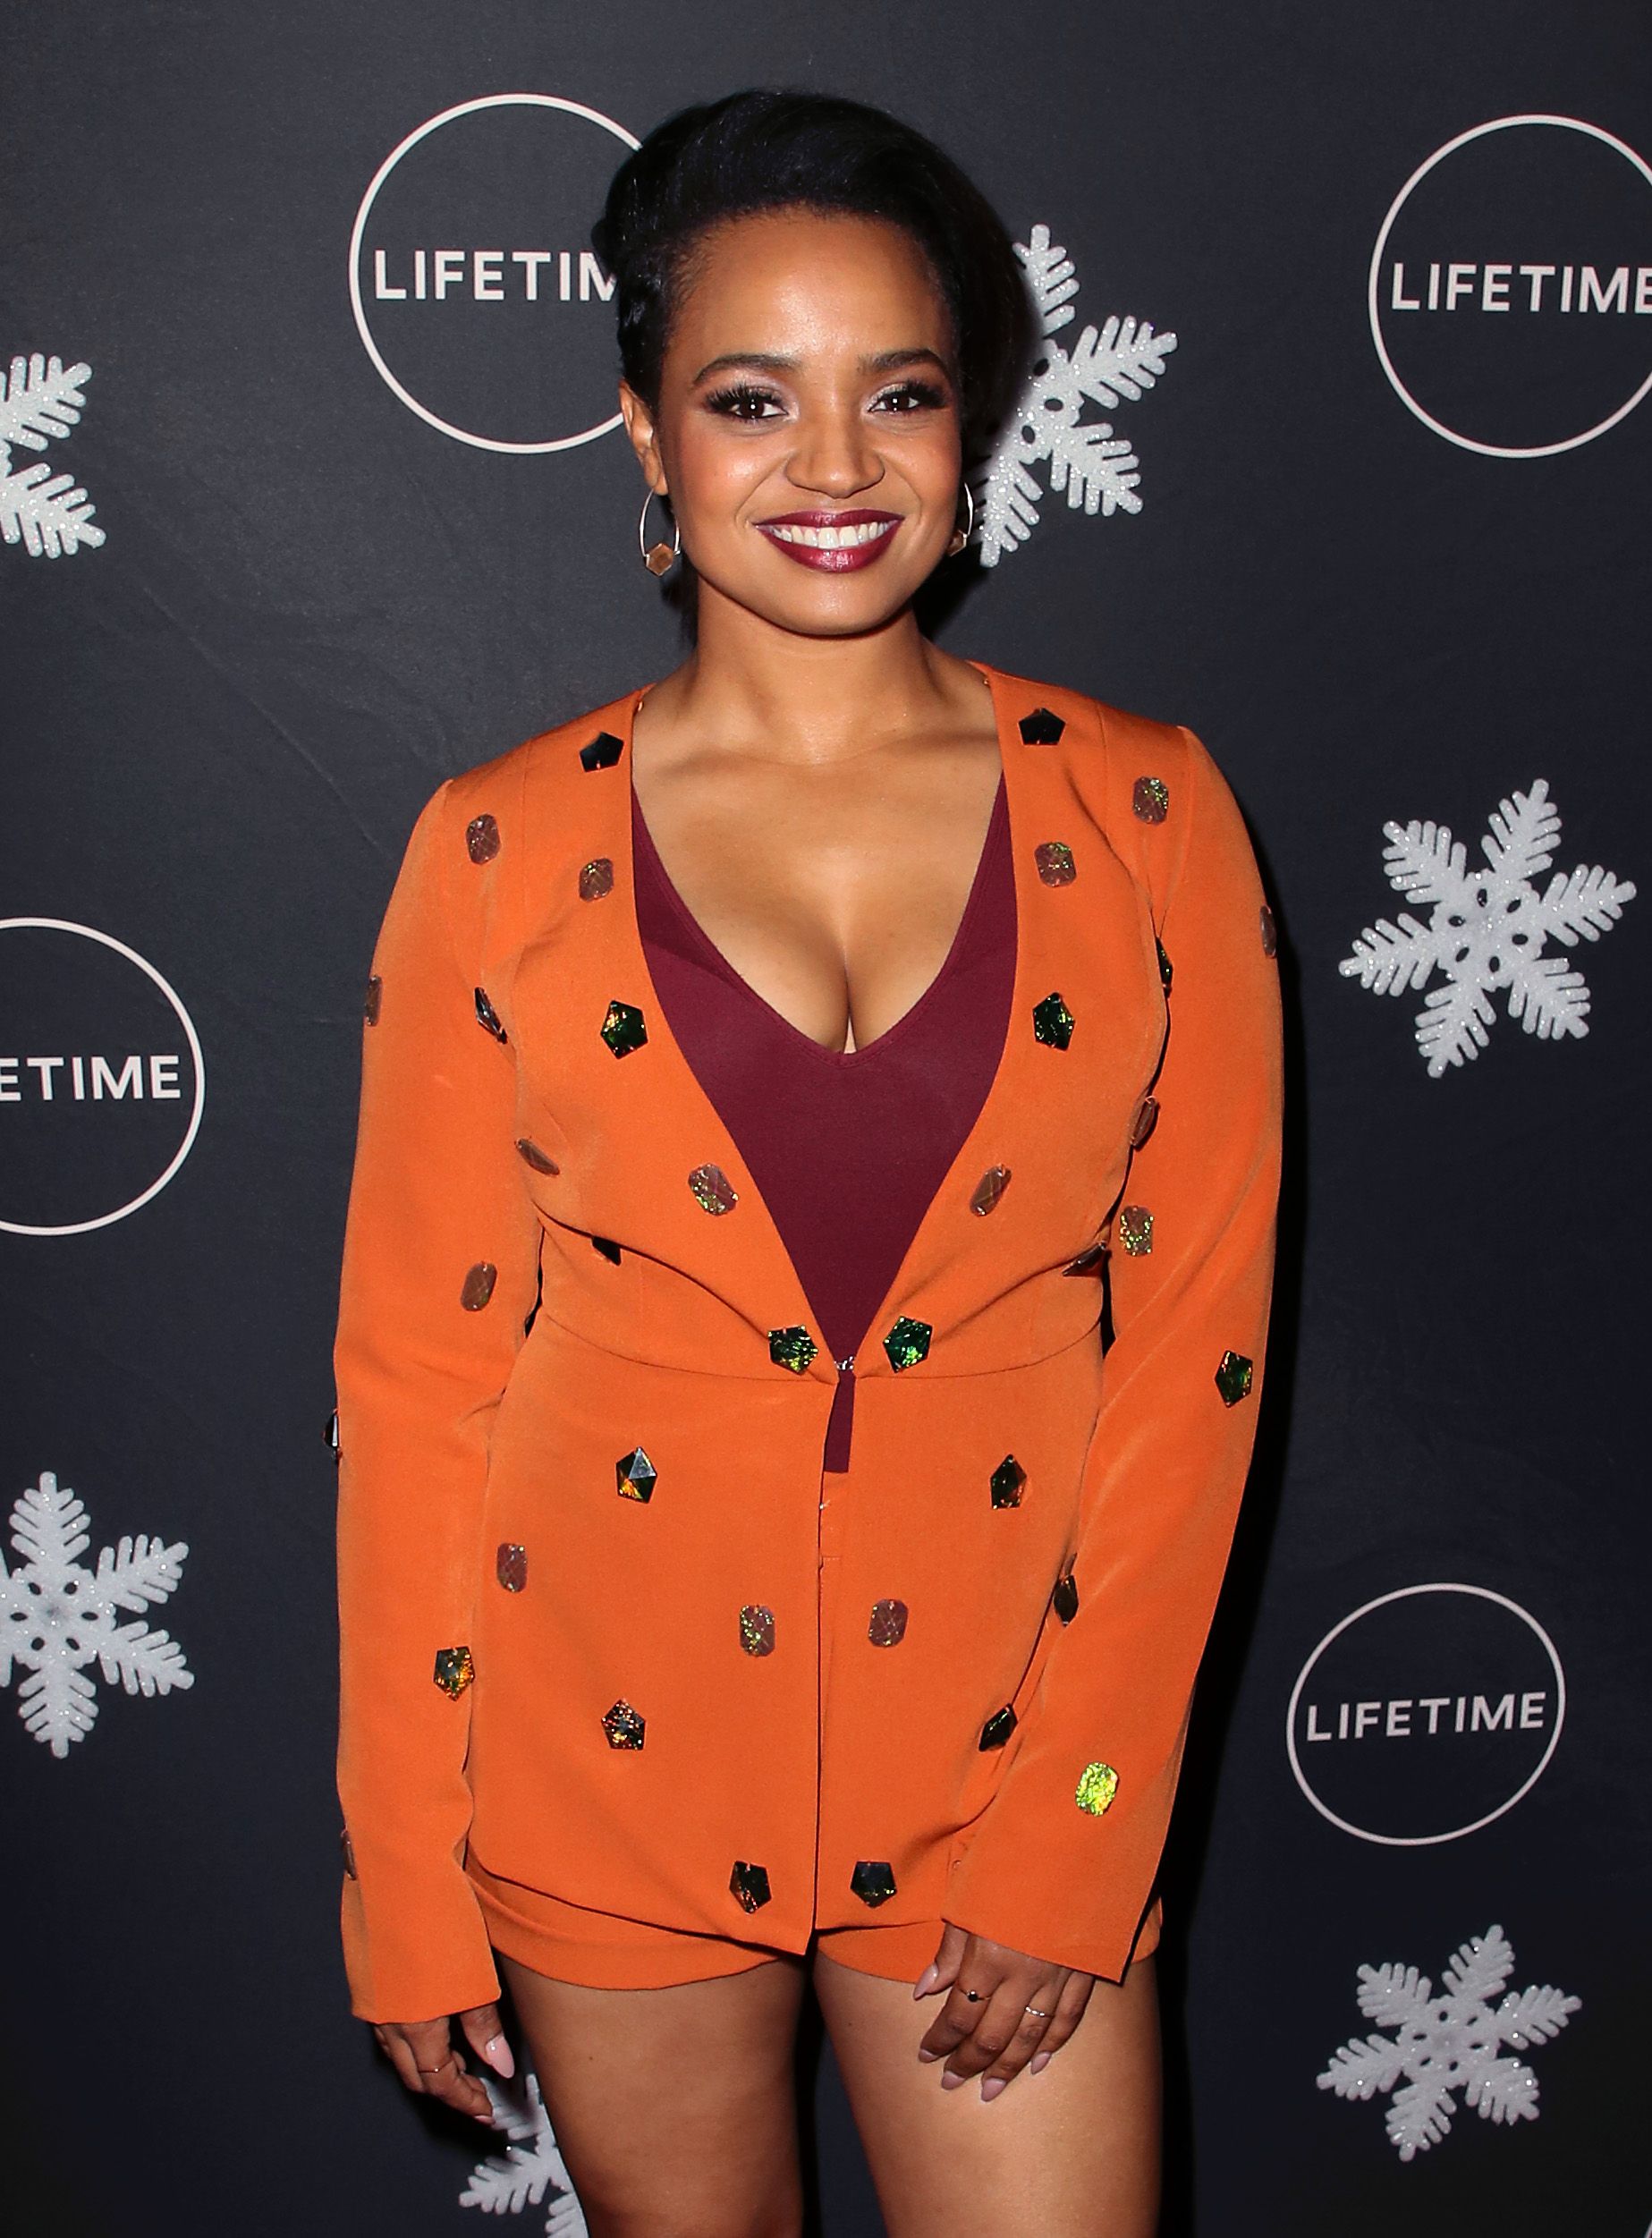 Actress Kyla Pratt attends the 2019 "It's a Wonderful Lifetime" holiday party at Los Angeles, California. | Photo: Getty Images